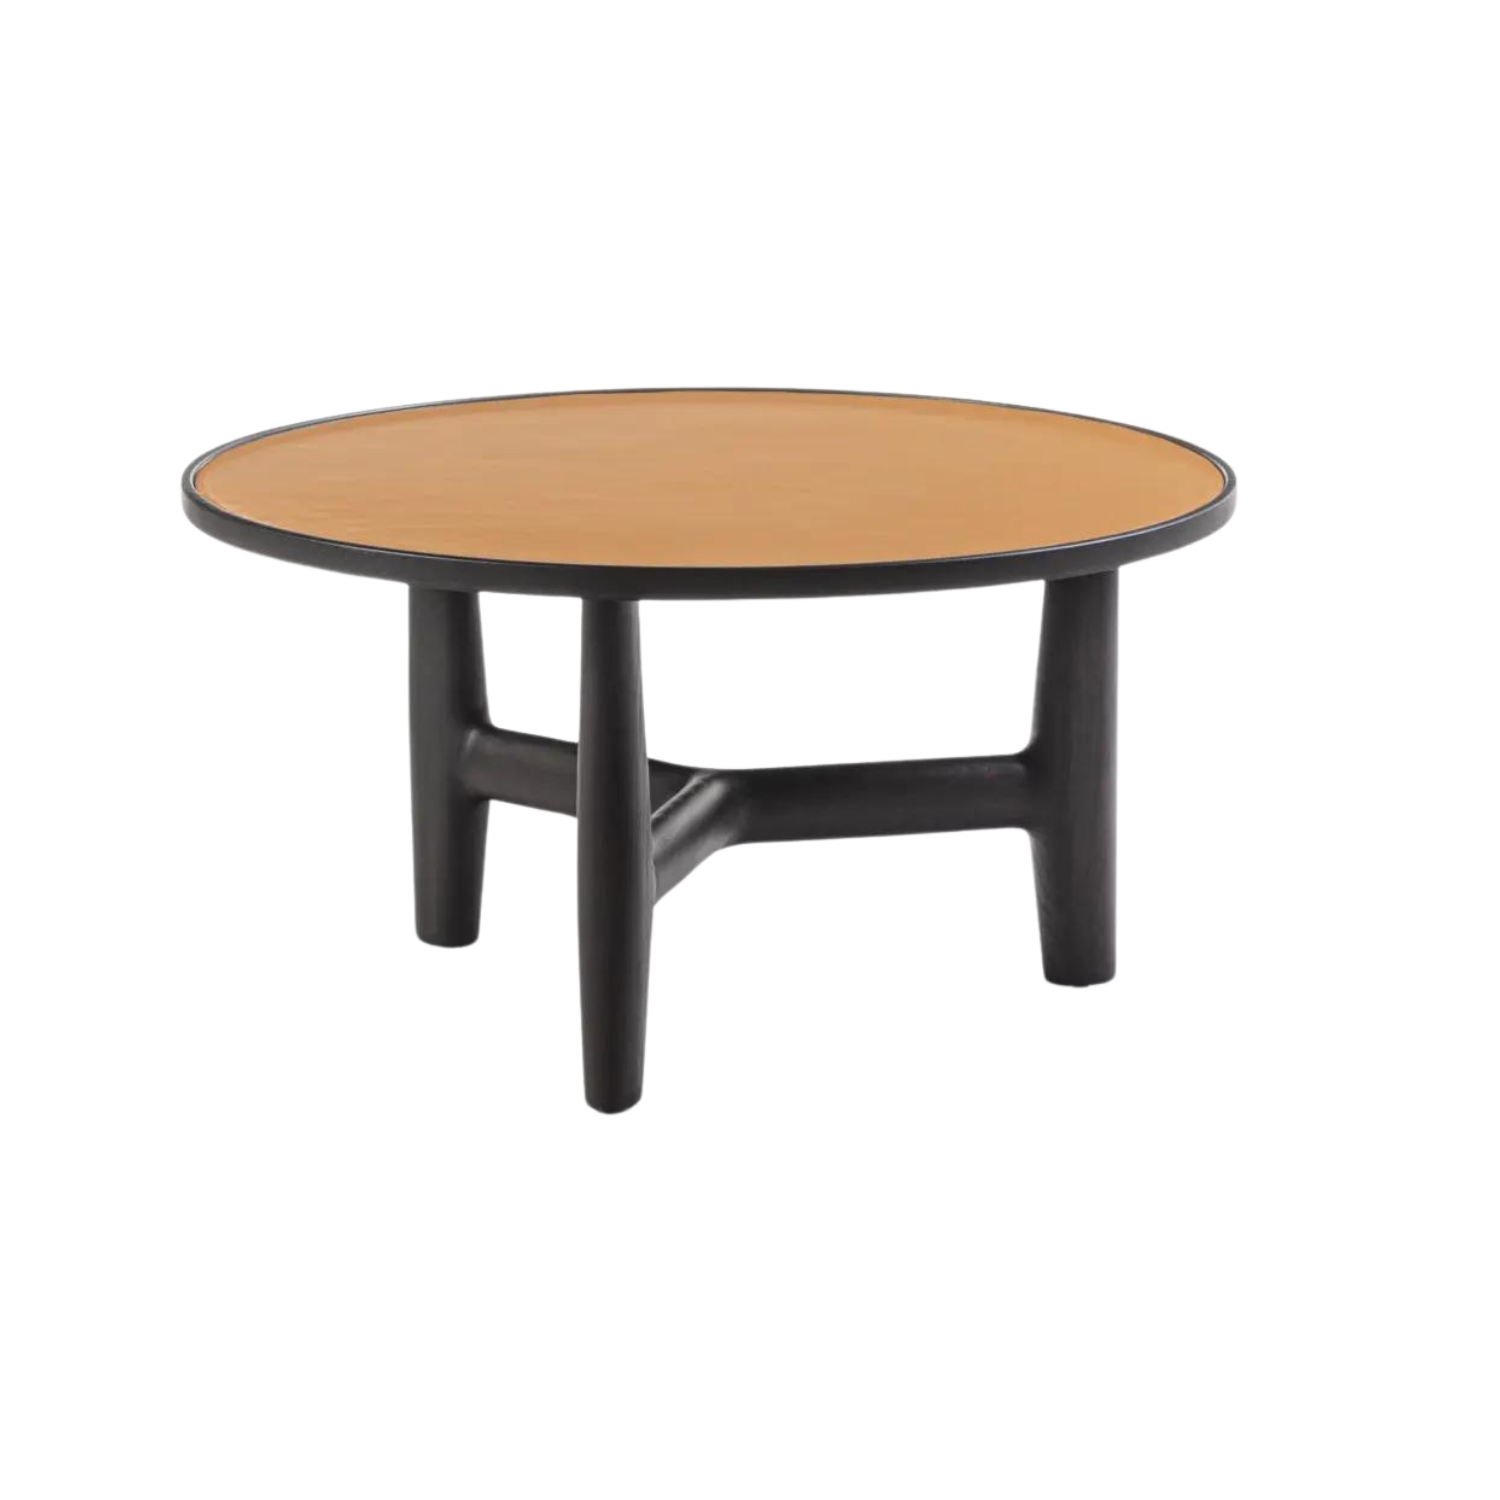 TILLOW 85 M - Side Table